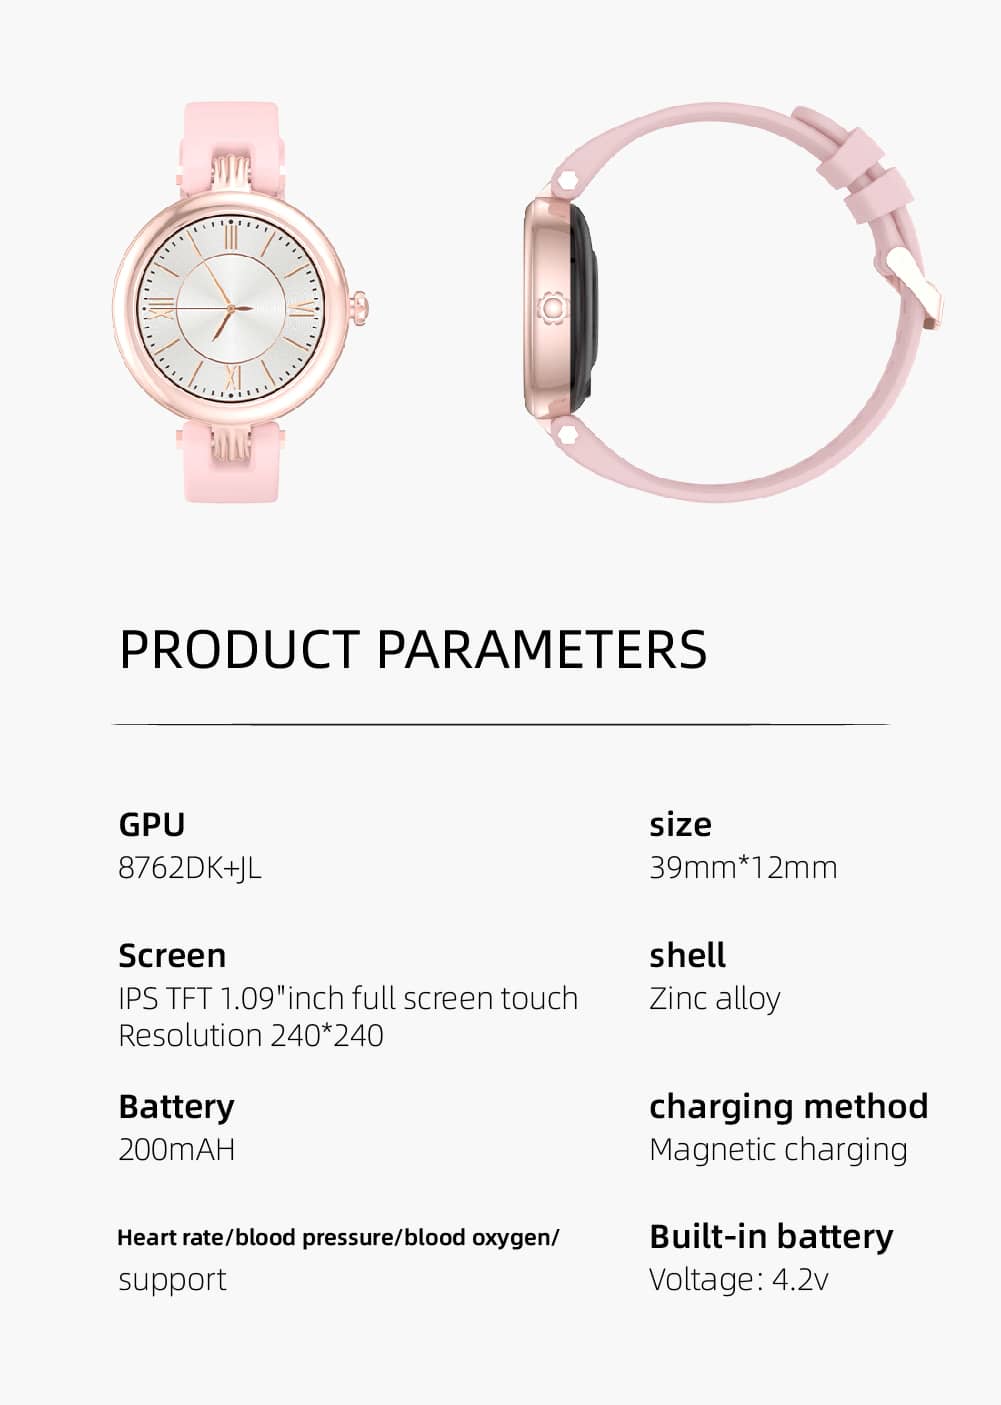 Findtime Smart Watch for Women Bluetooth Calling Blood Pressure Monitoring